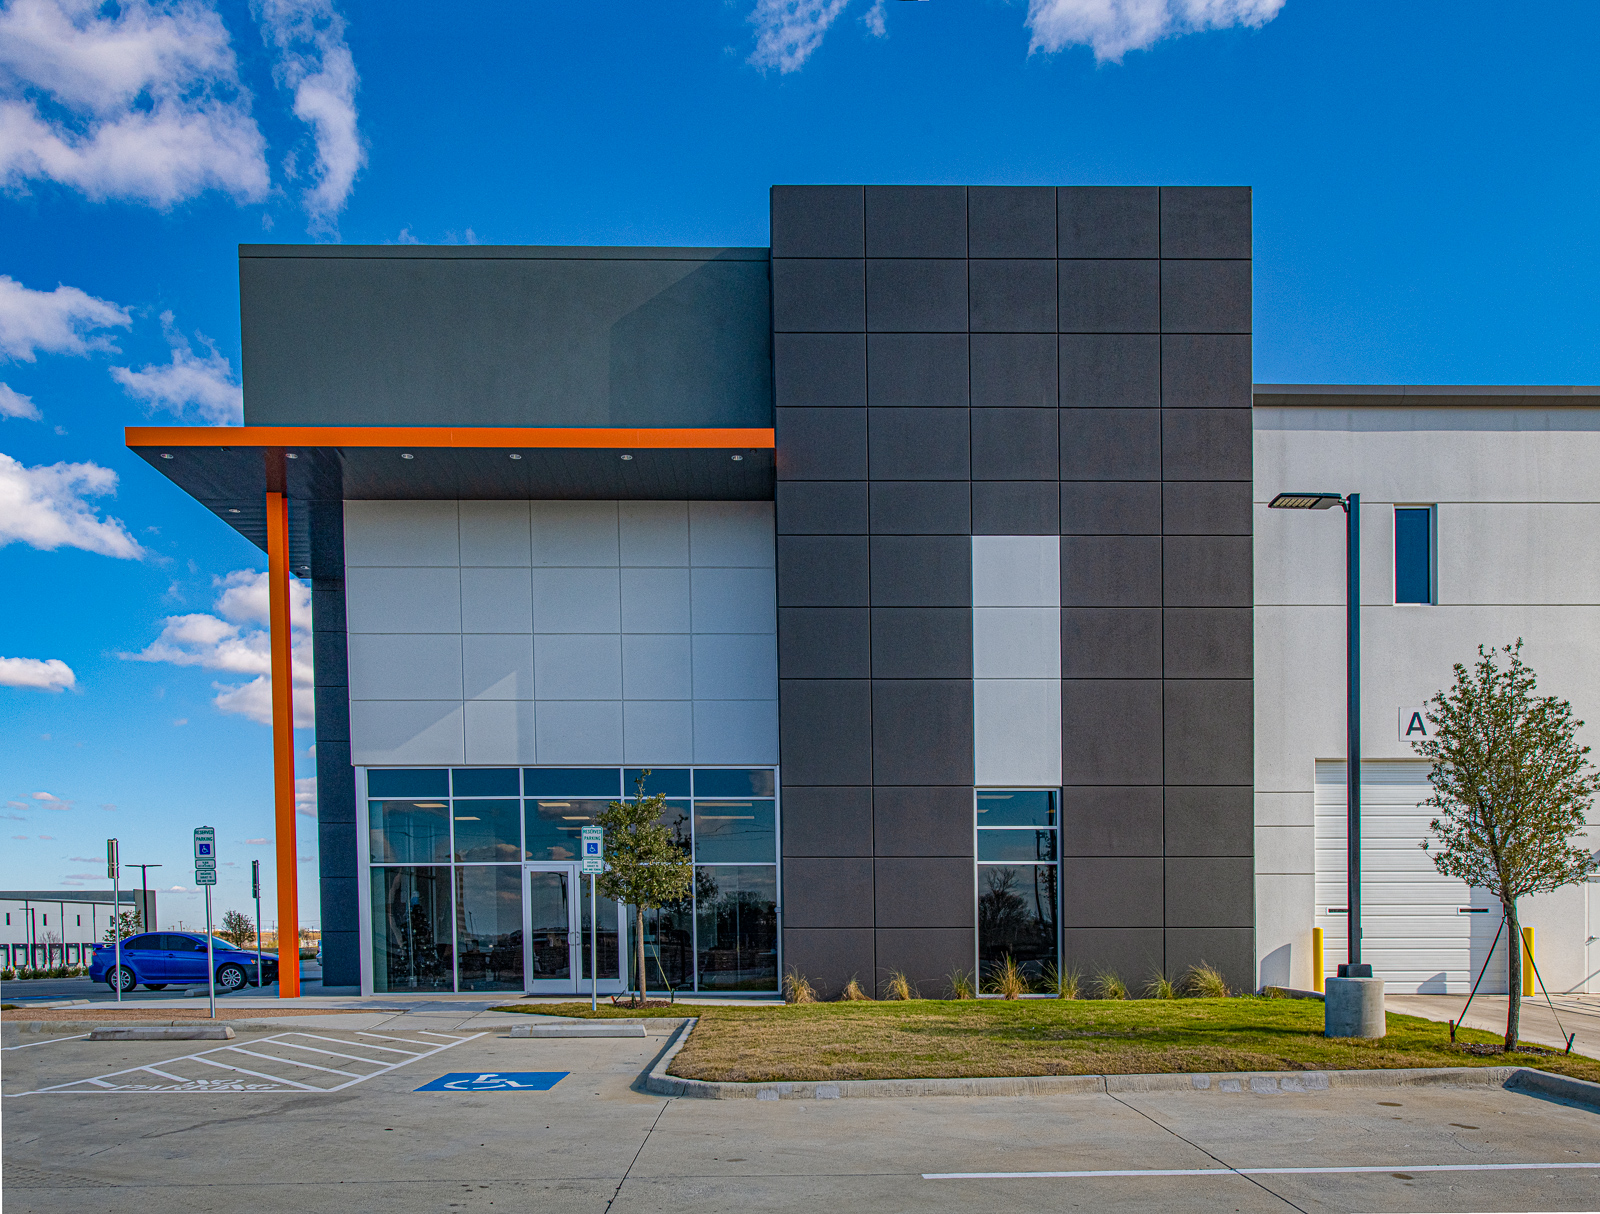 An orange and black building with a parking lot.